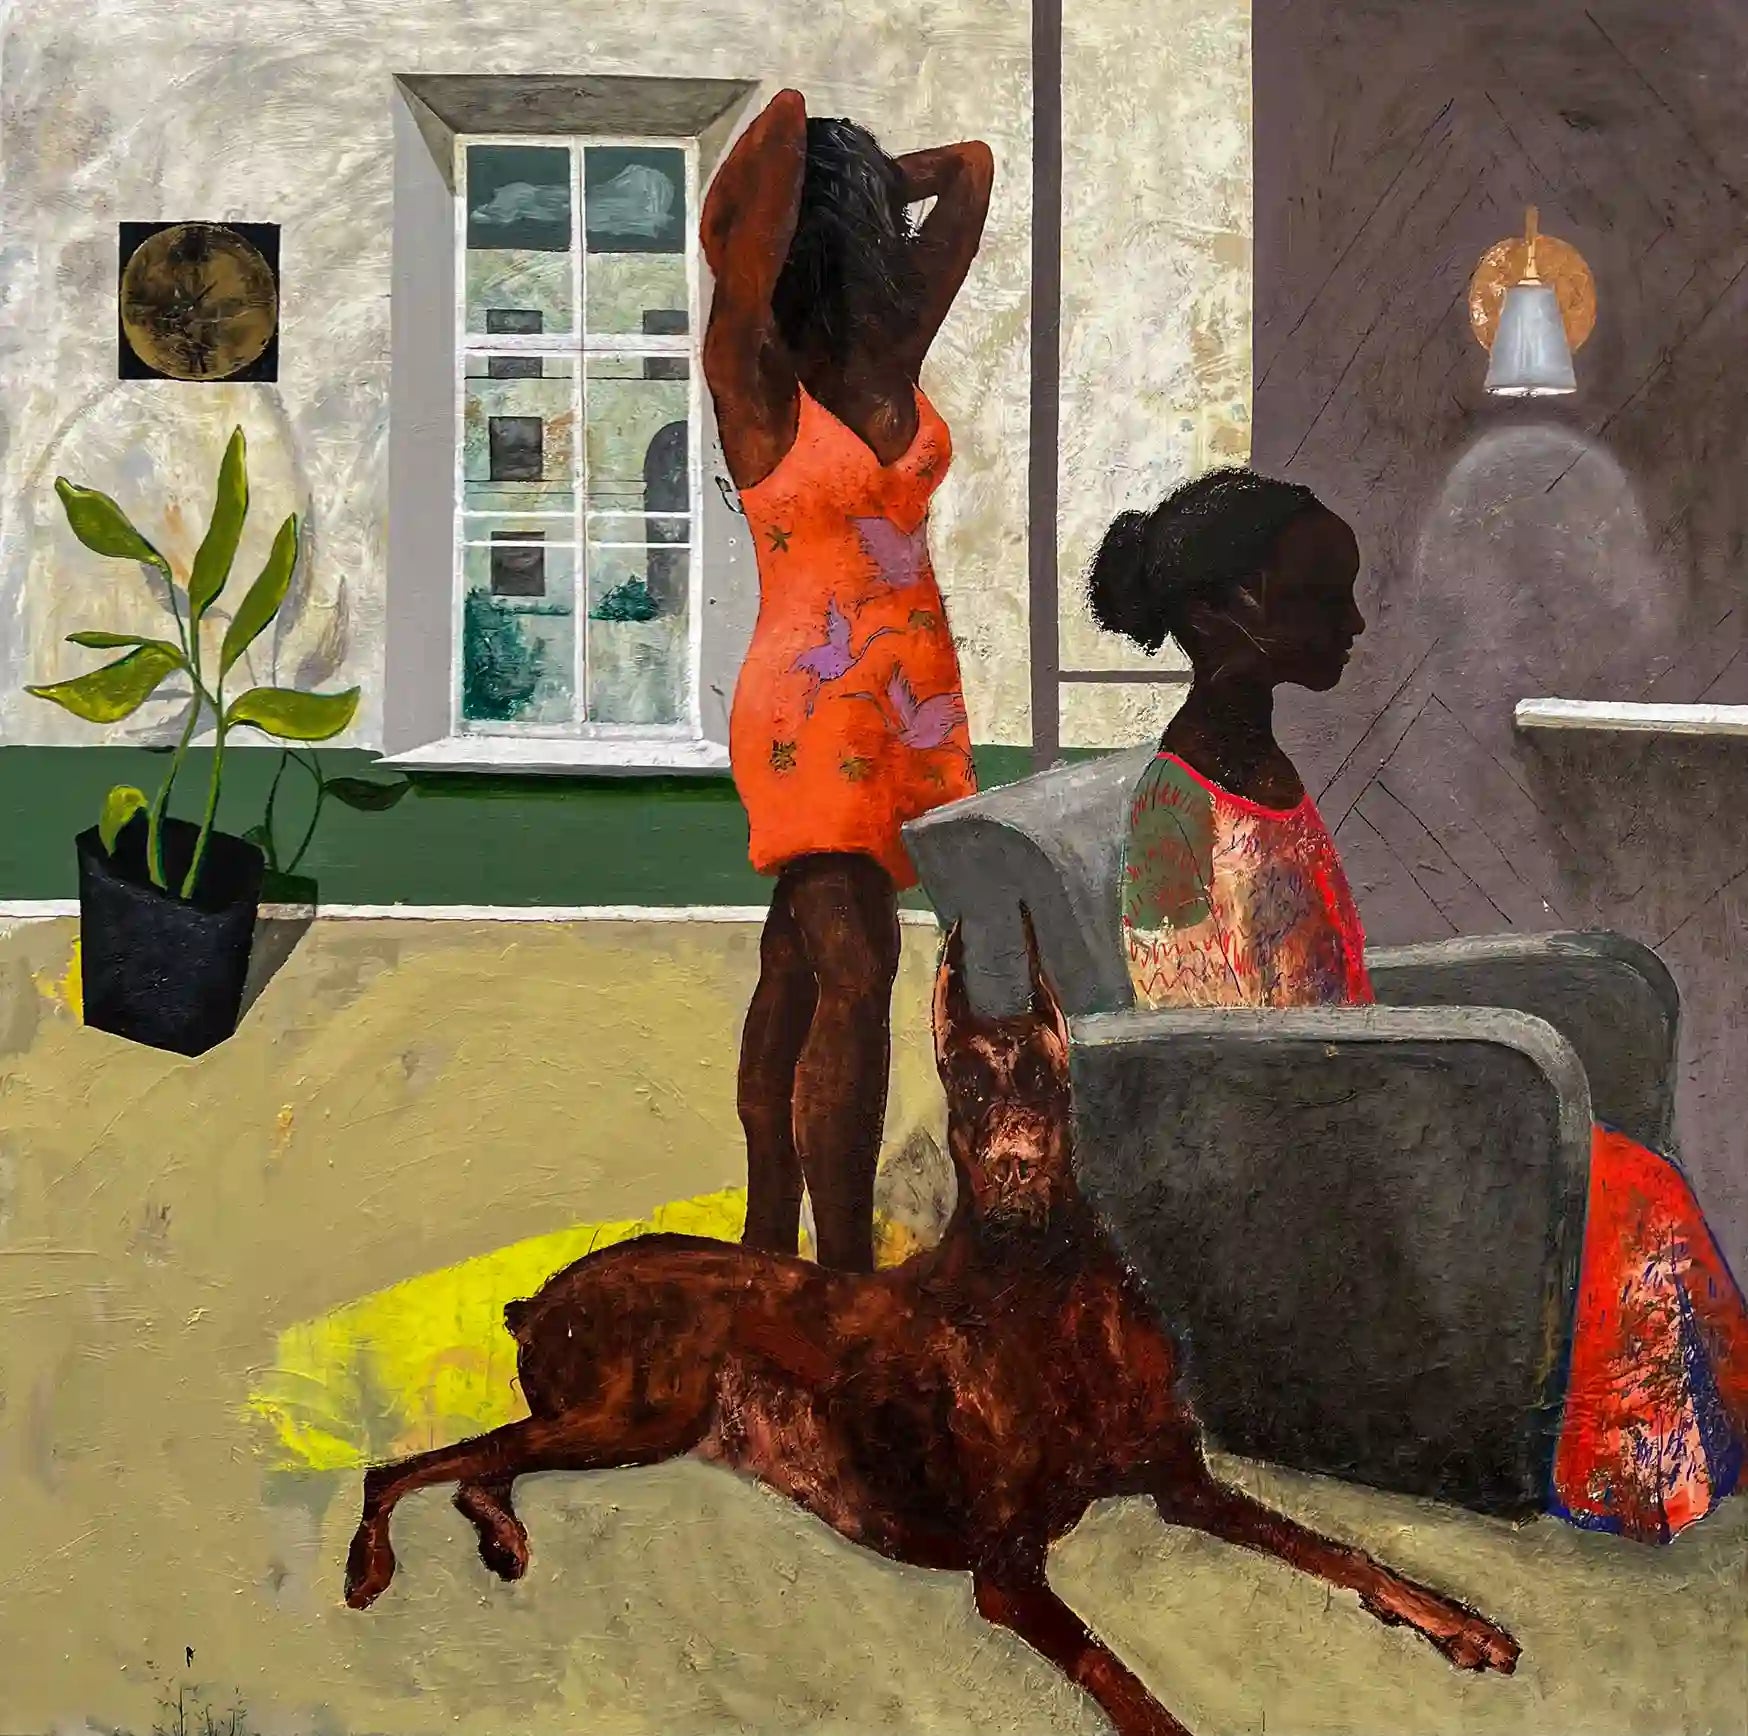 Oil on canvas painting titled 'Waiting' by Armenian artist Hayk Galoyan from 2022. The artwork, sized 60"x60", depicts two figures in an intimate indoor setting; one gazing out a window and the other seated contemplatively. A lounging dog and interior details like plants and a glowing lamp add depth to the scene.